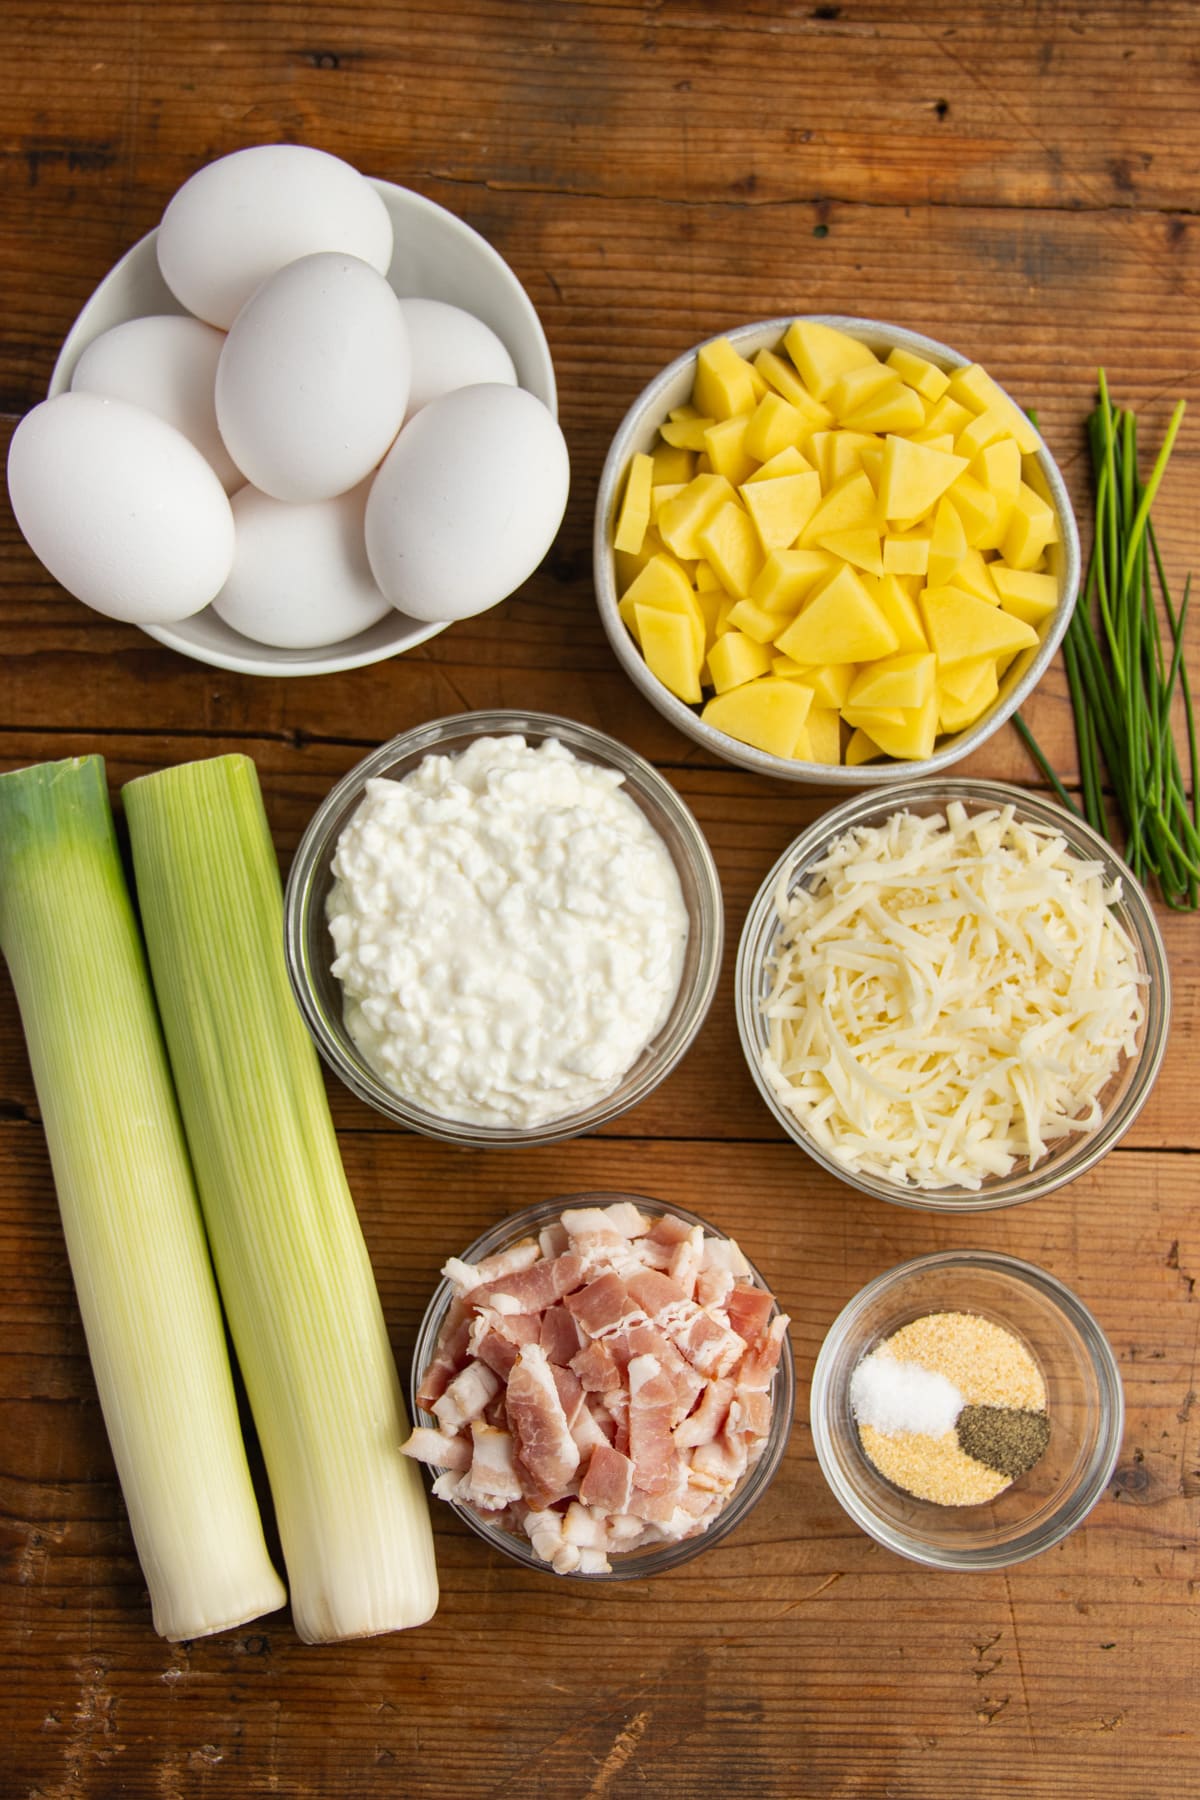 This is a picture of all the ingredients needed for this recipe.